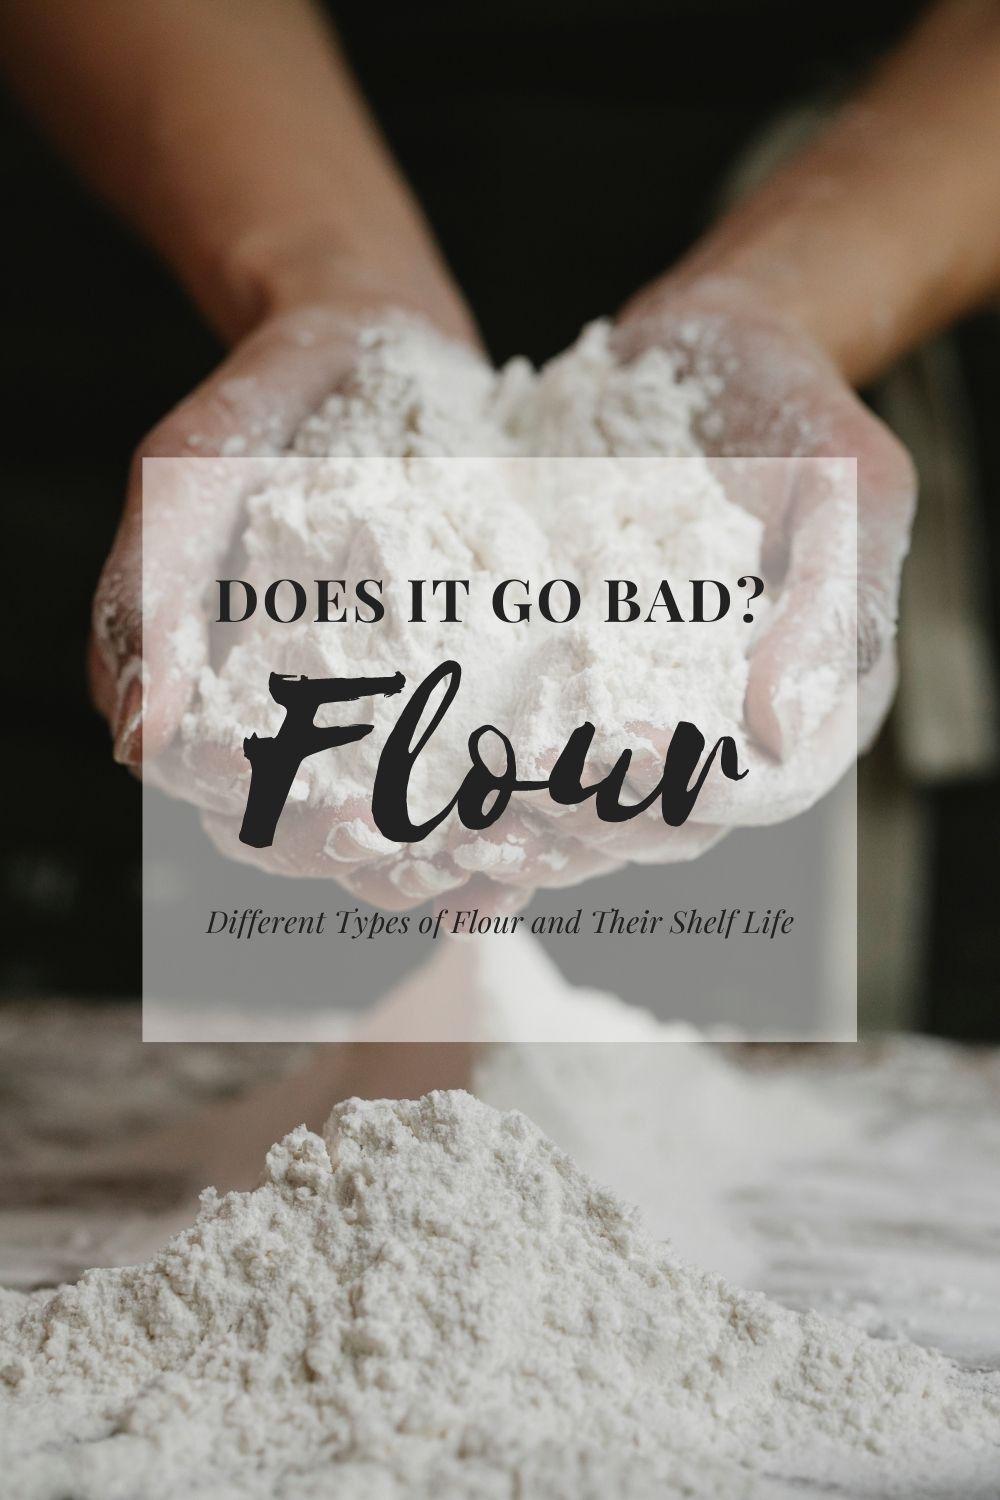 Can All-Purpose Flour Go Bad?